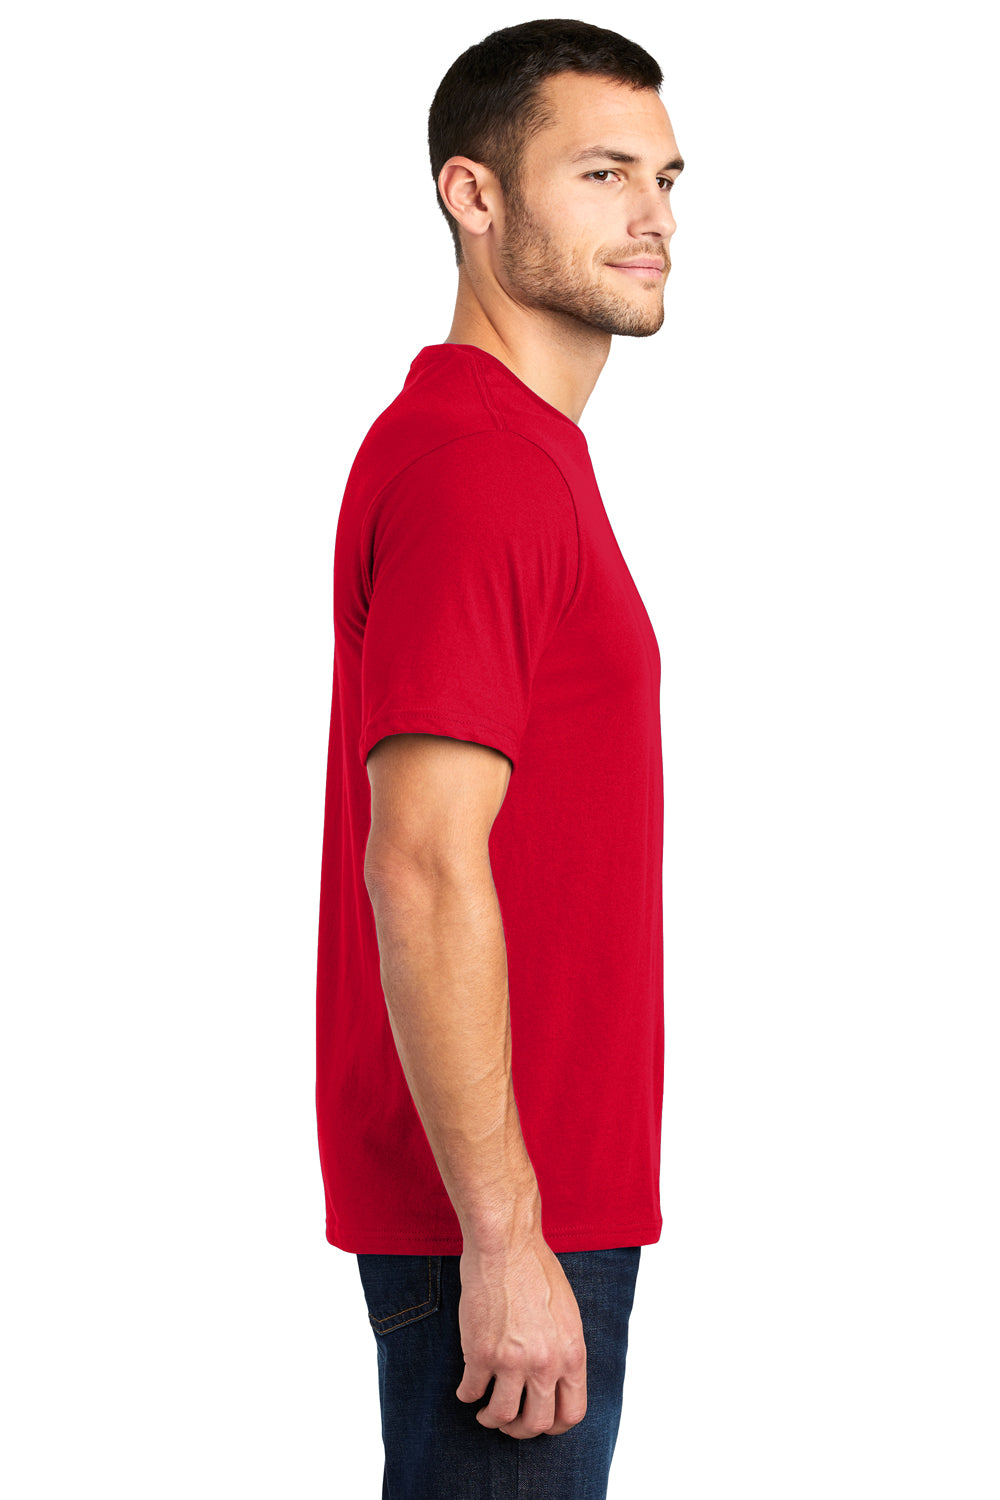 District DT6000 Mens Very Important Short Sleeve Crewneck T-Shirt Red Side